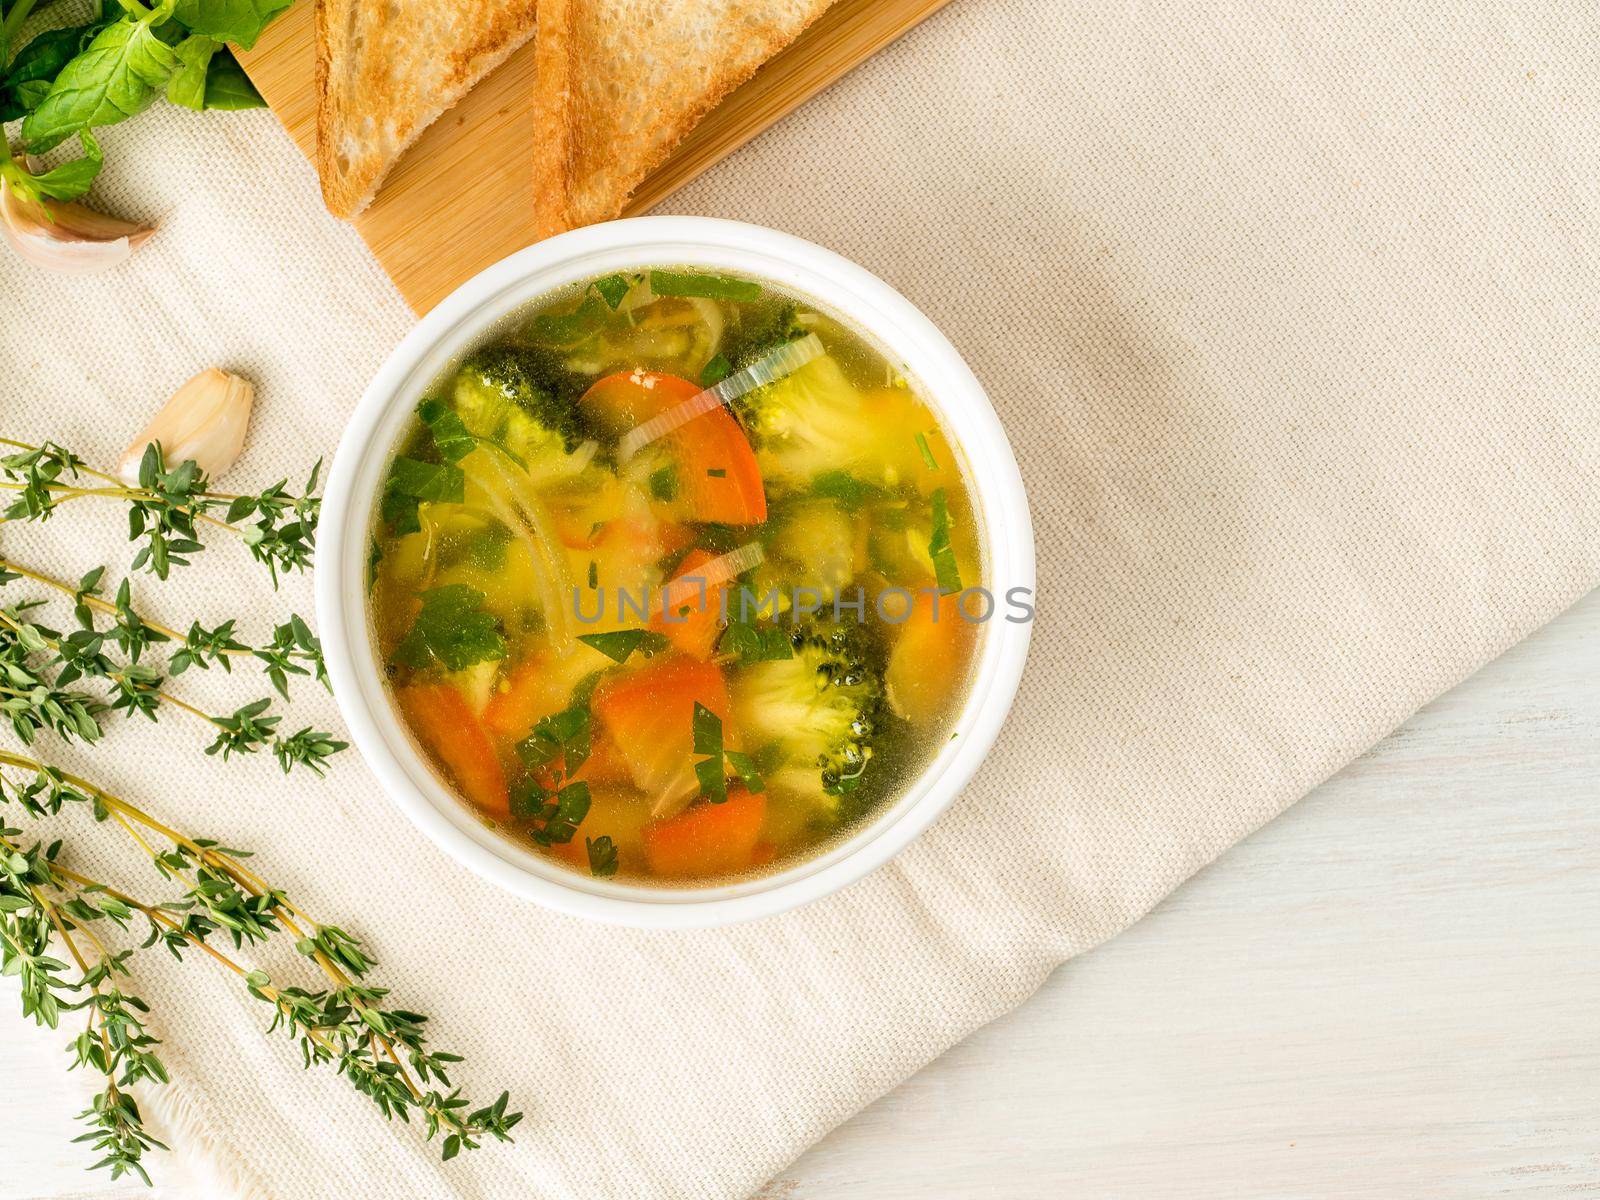 Delicious thick Soup with mixed vegetables - cauliflower, broccoli, carrots, potatoes, garlic, tomatoes. Healthy diet food. Top view, copy space for text